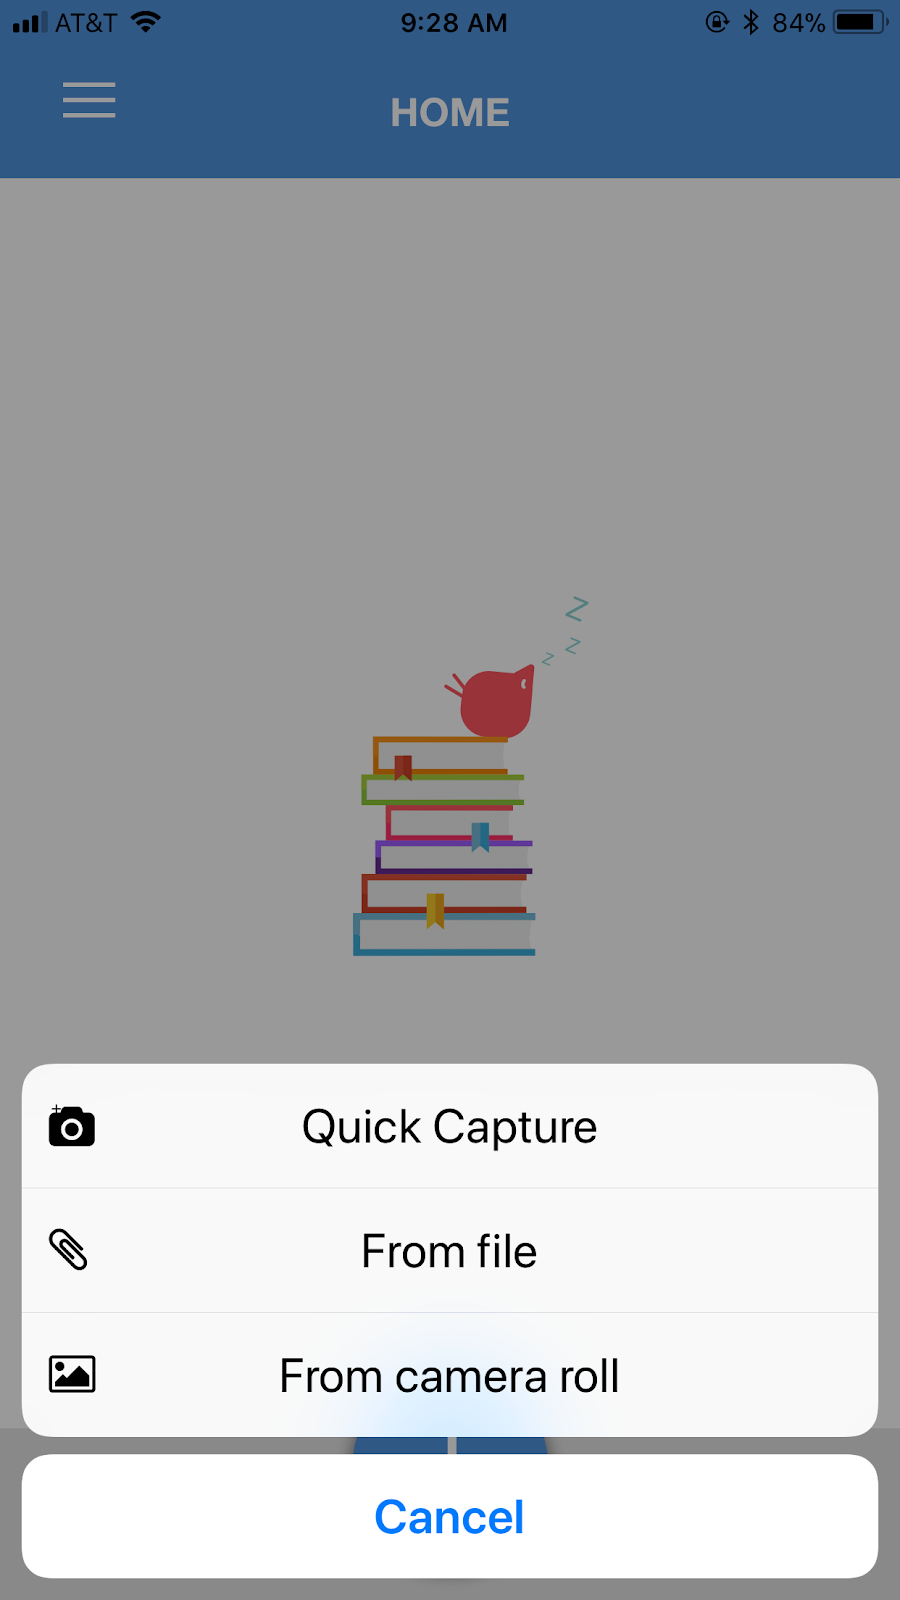 Adding an image by quick capture, from file, and from camera roll